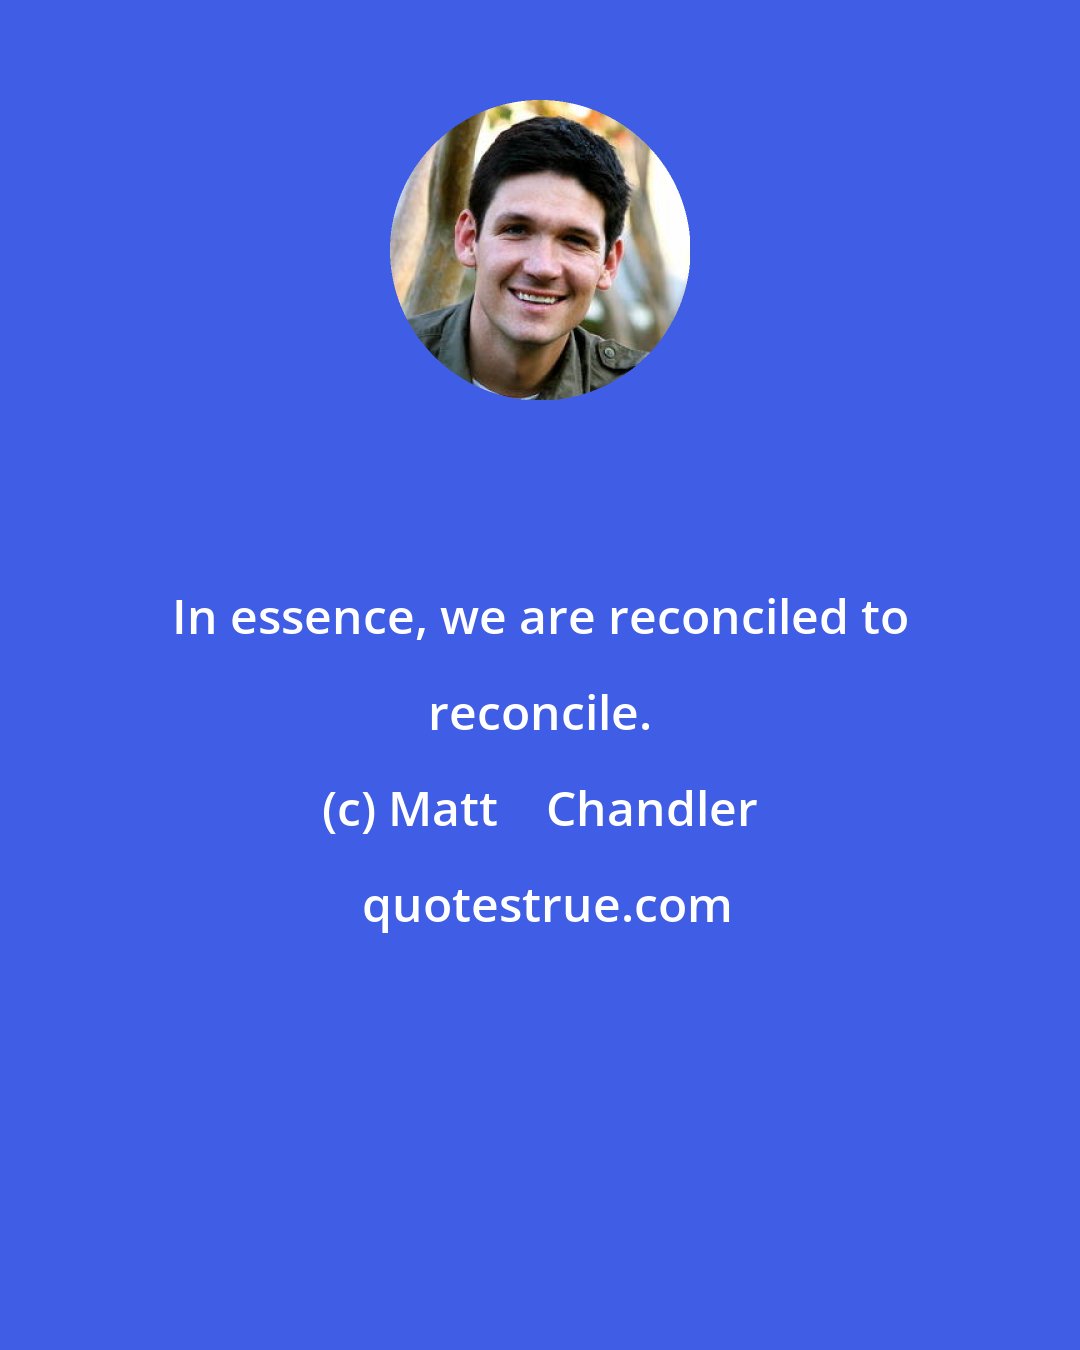 Matt    Chandler: In essence, we are reconciled to reconcile.